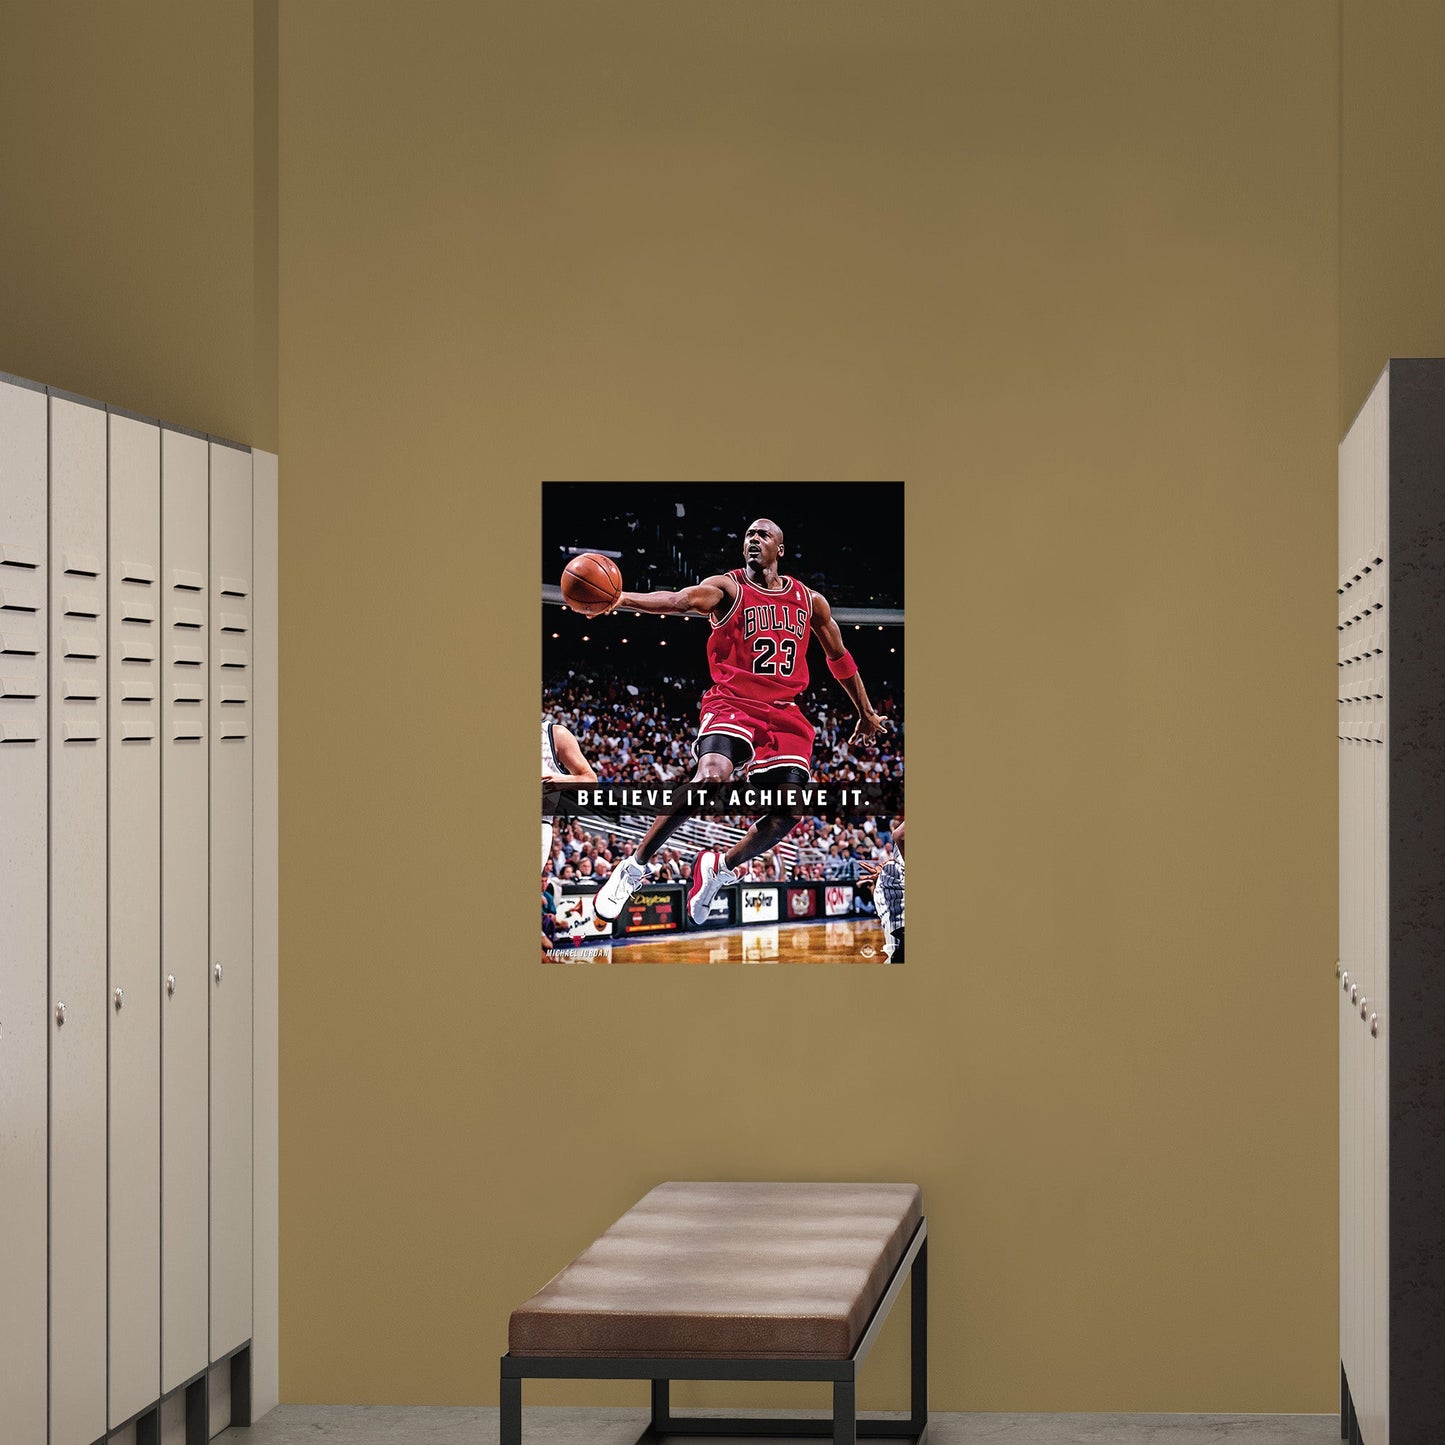 Chicago Bulls: Michael Jordan Scoring Motivational Poster - Officially Licensed NBA Removable Adhesive Decal